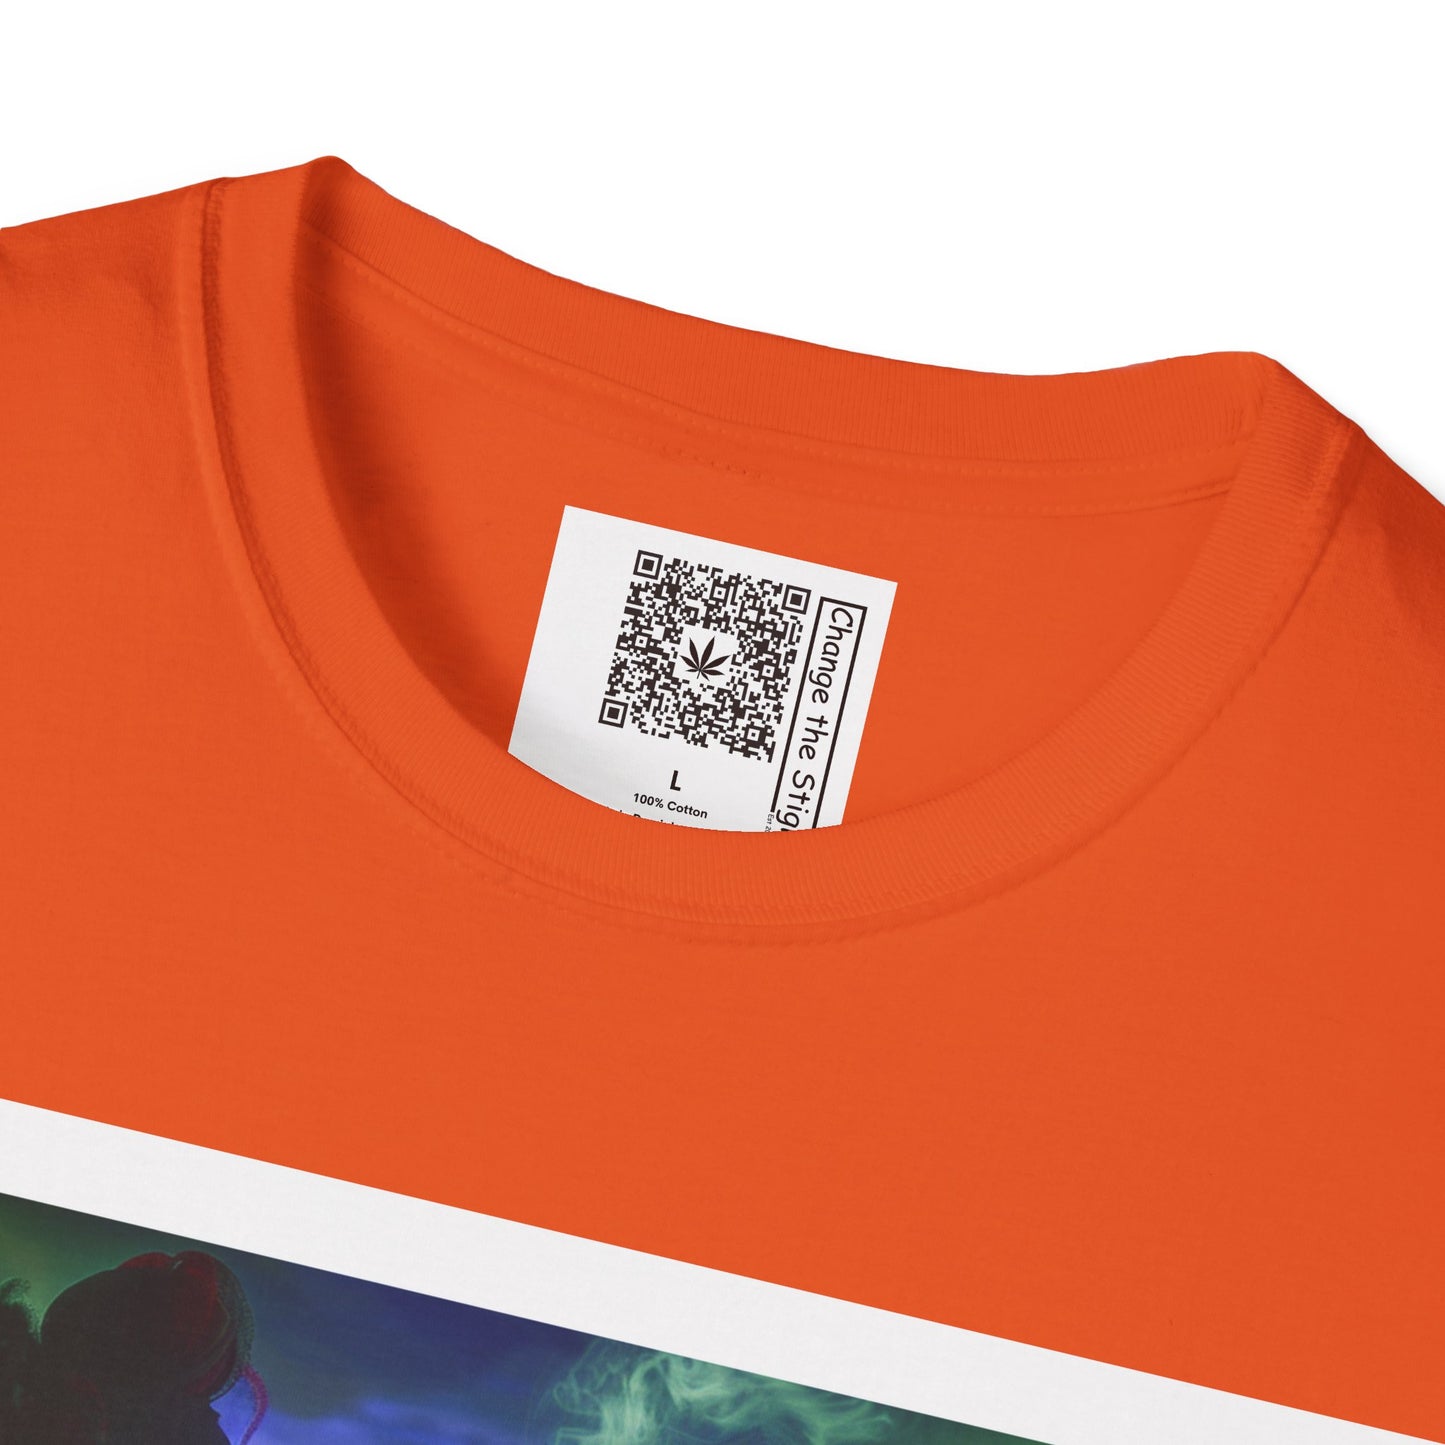 Change the Stigma, Orange color, shirt featuring a woman smoking cannabis while bowling, shirt is open showing QR code tag